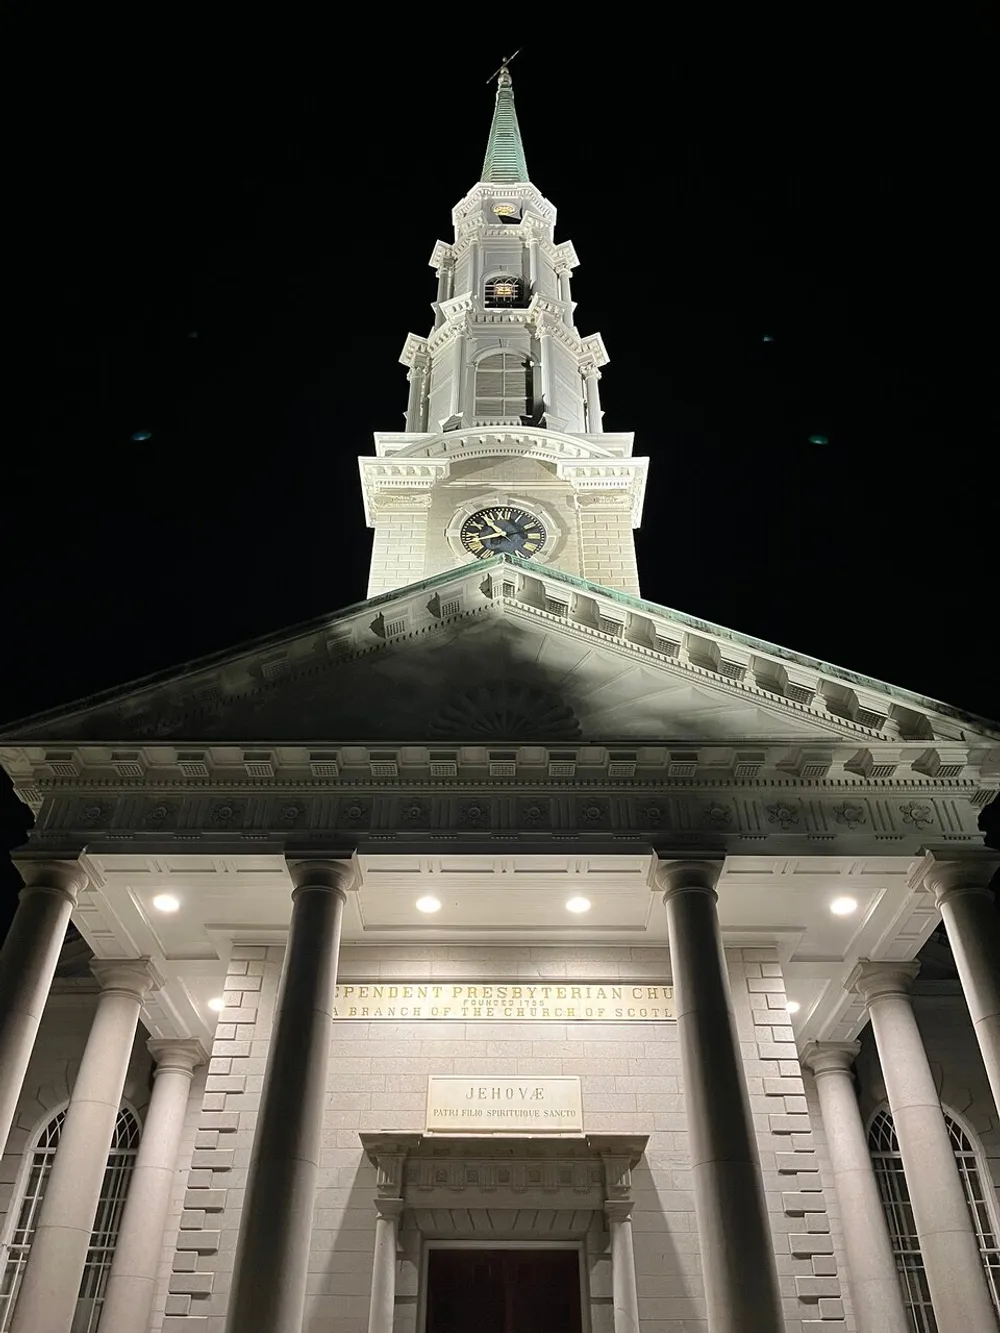 The image shows the illuminated facade of the Independent Presbyterian Church at night highlighting its classical architecture and prominent steeple with a clock